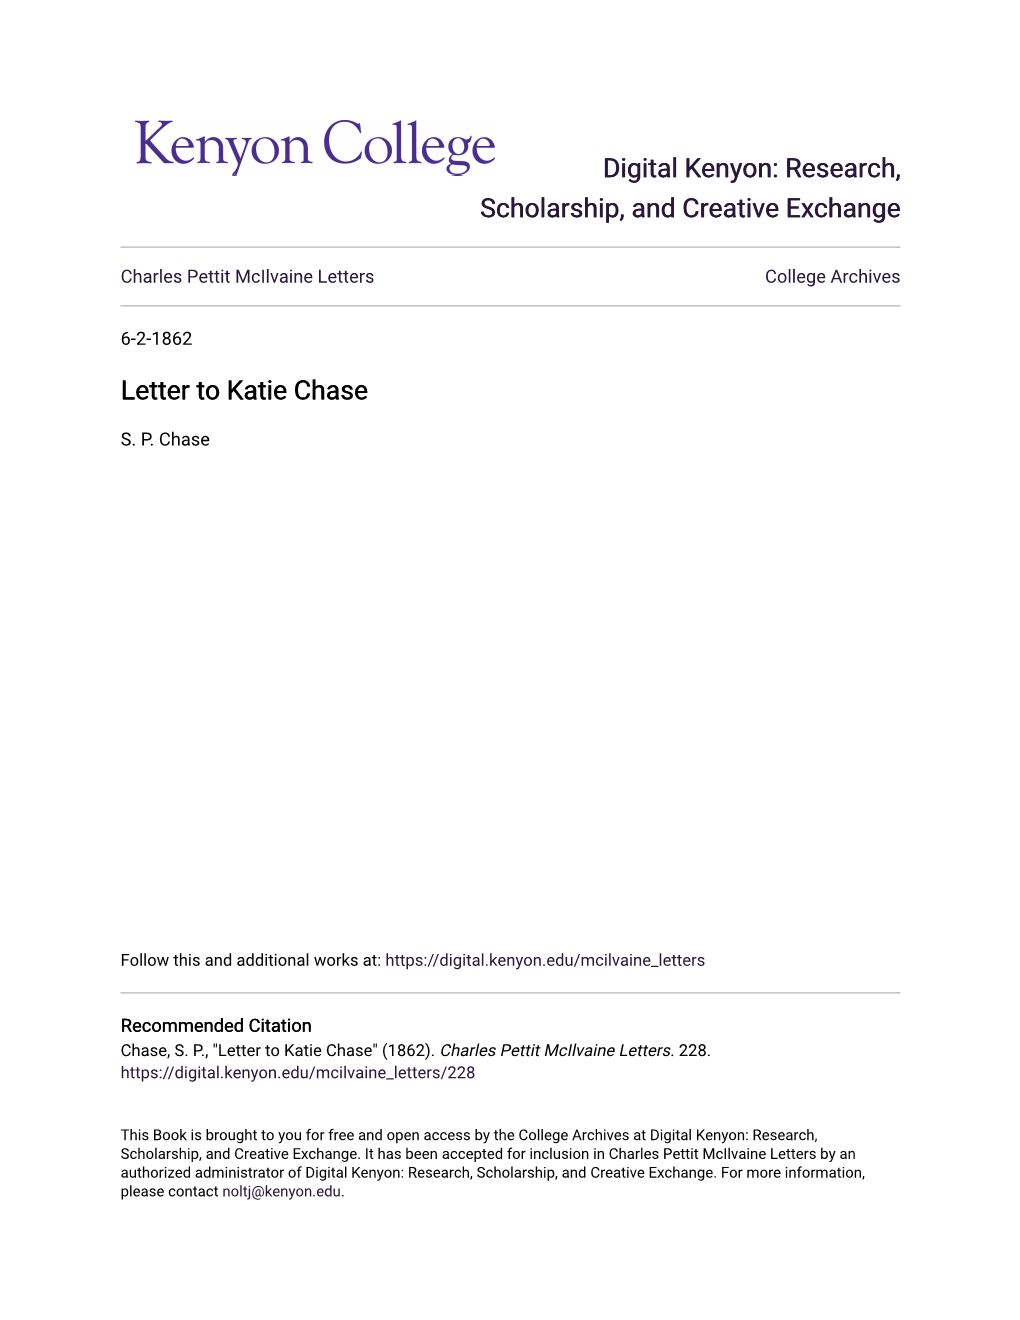 Letter to Katie Chase